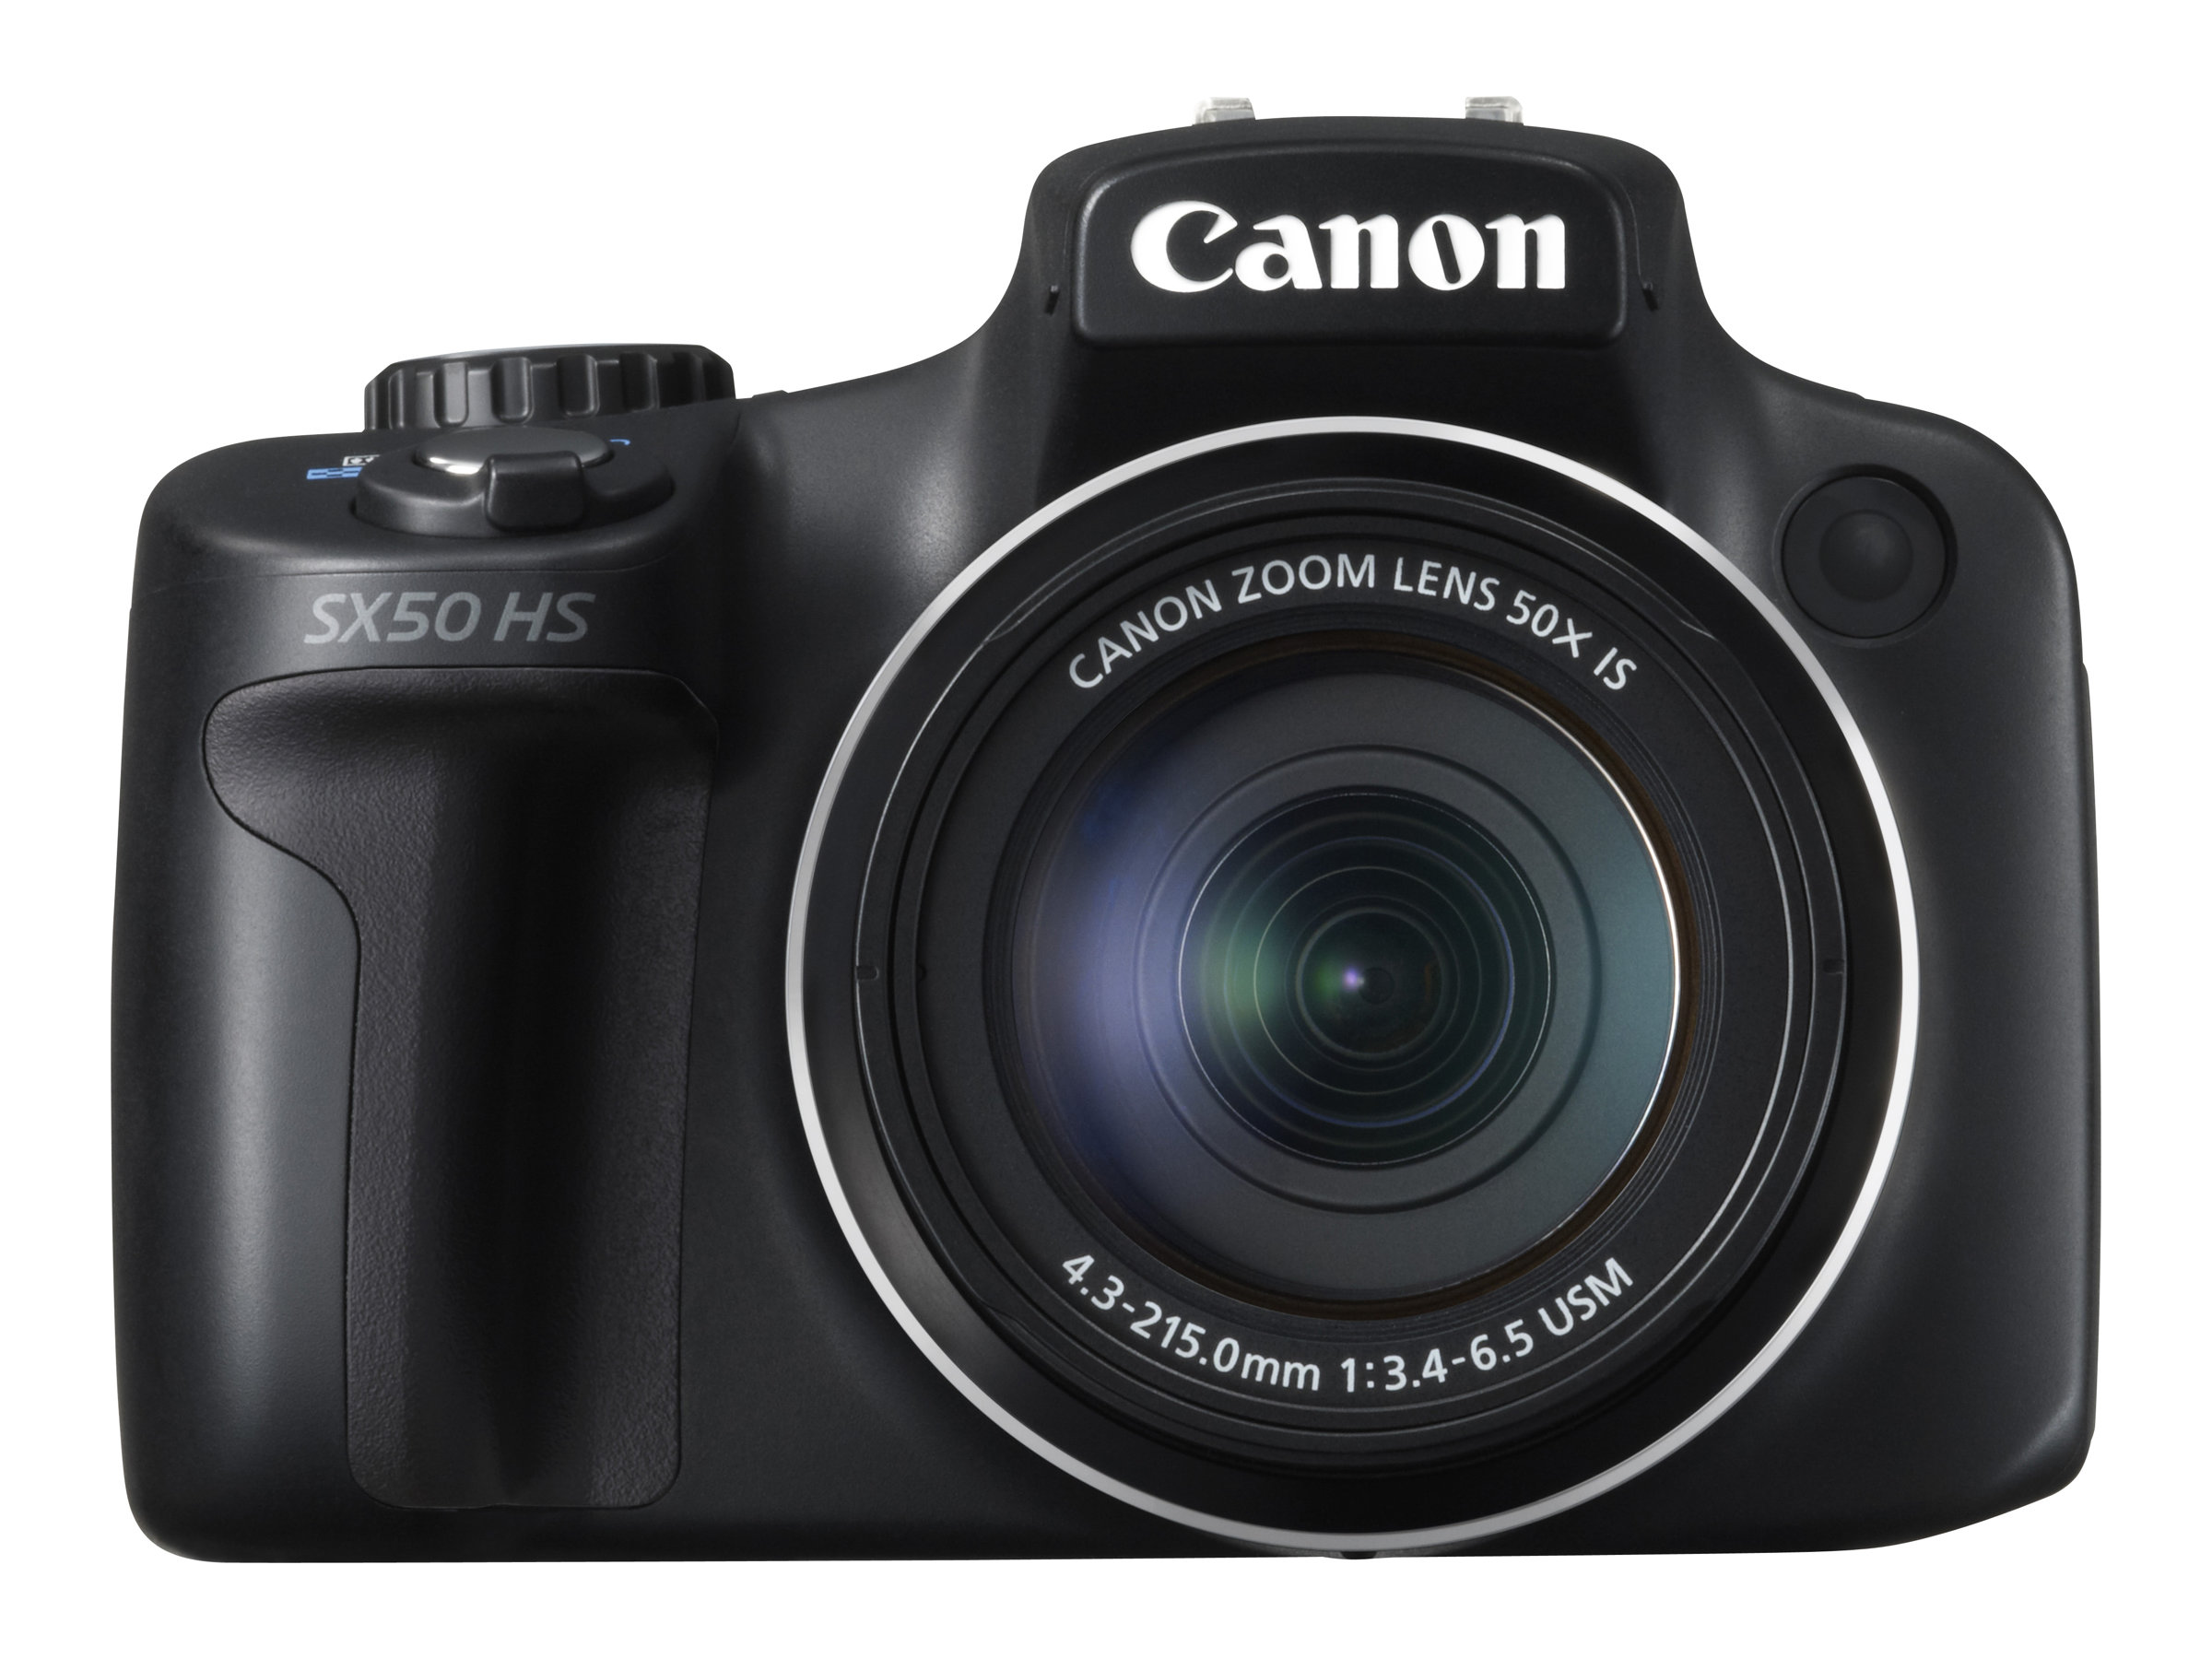 Canon PowerShot SX50 HS - Digital camera - compact - 12.1 MP - 1080p - 50x optical zoom - image 4 of 15